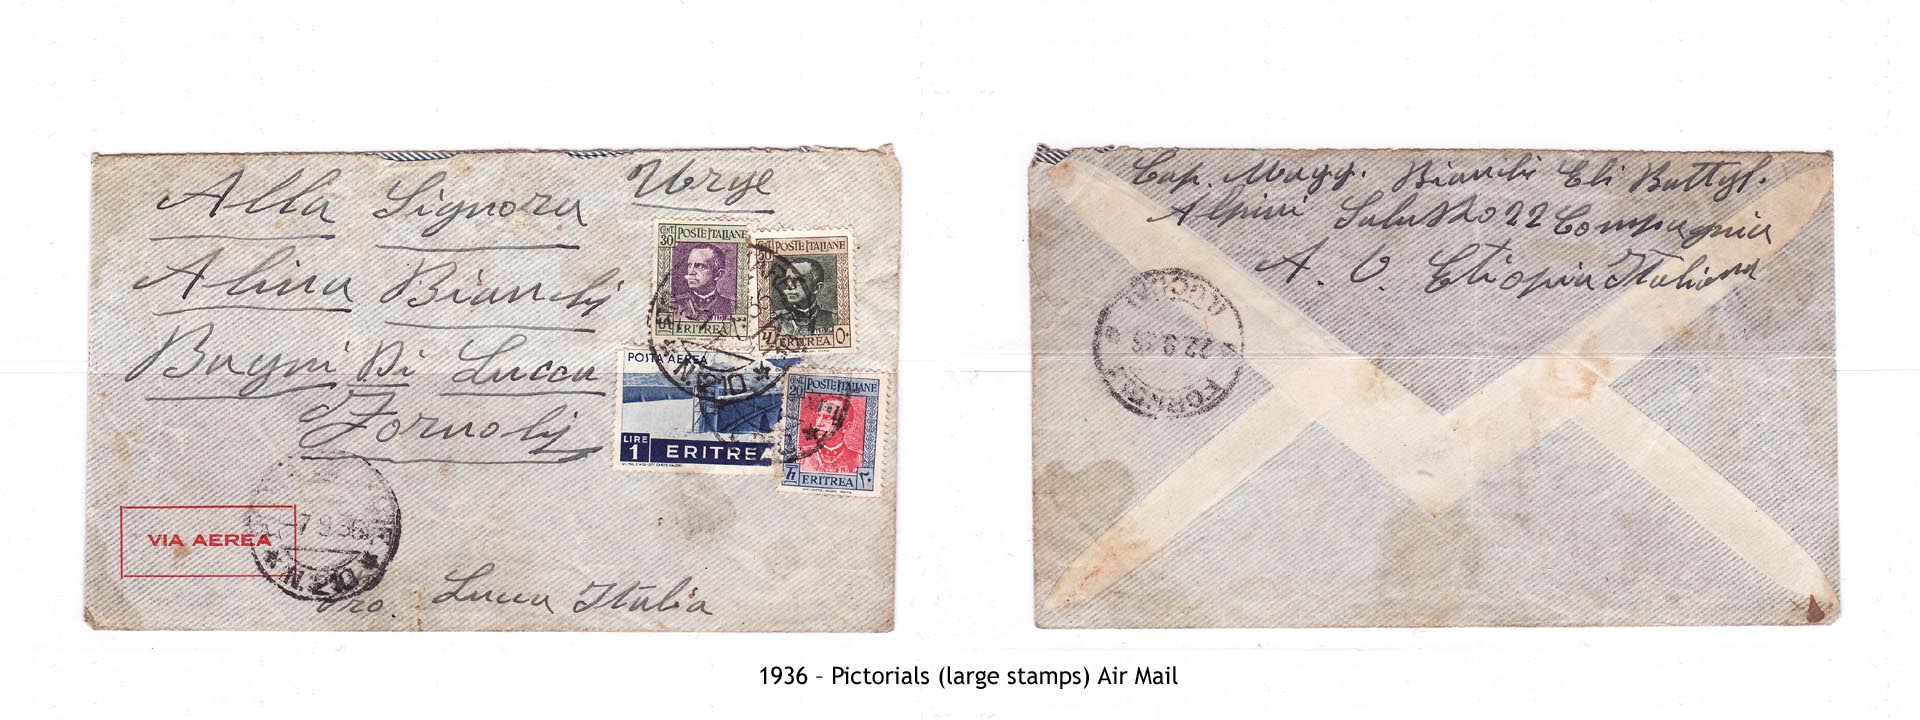 1936 – Eritrea Pictorials (large stamps) Air Mail